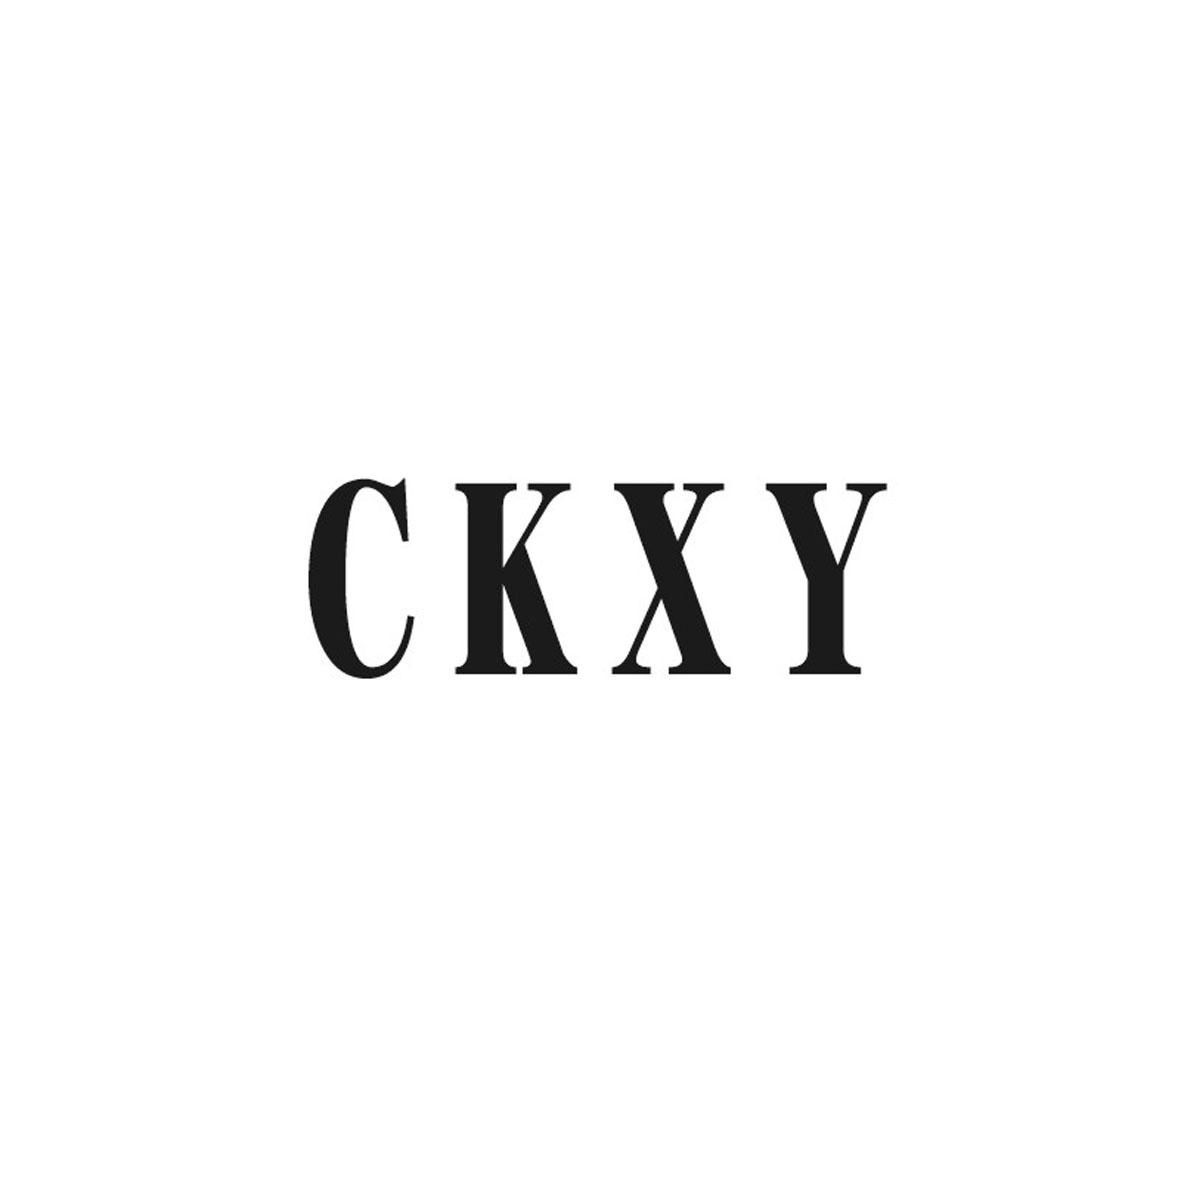 CKXY